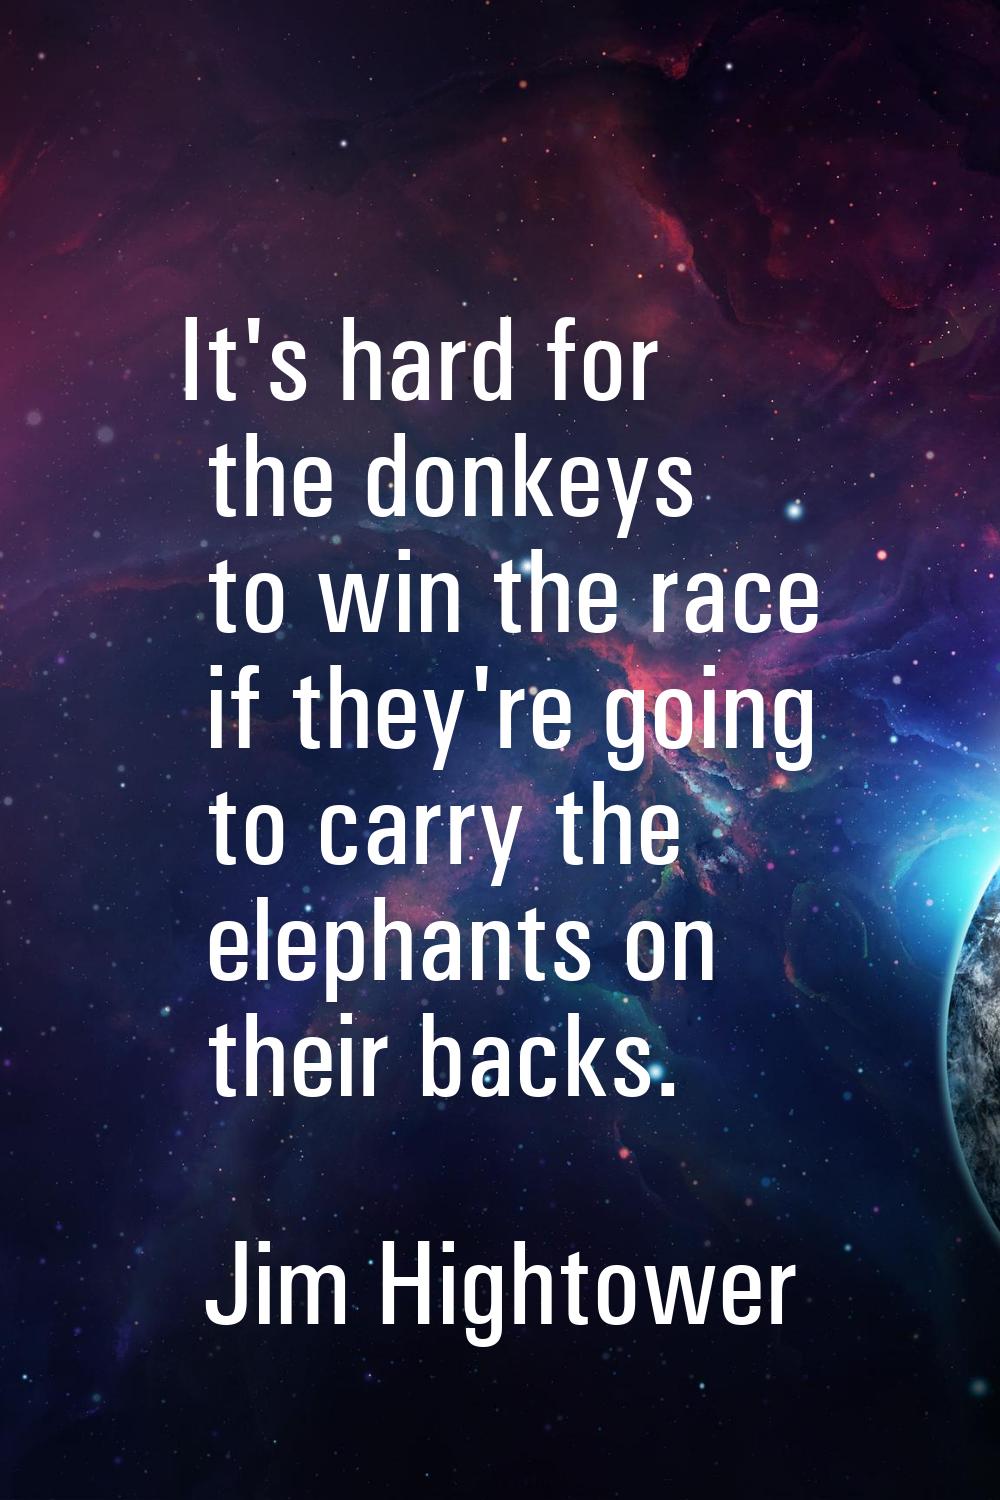 It's hard for the donkeys to win the race if they're going to carry the elephants on their backs.